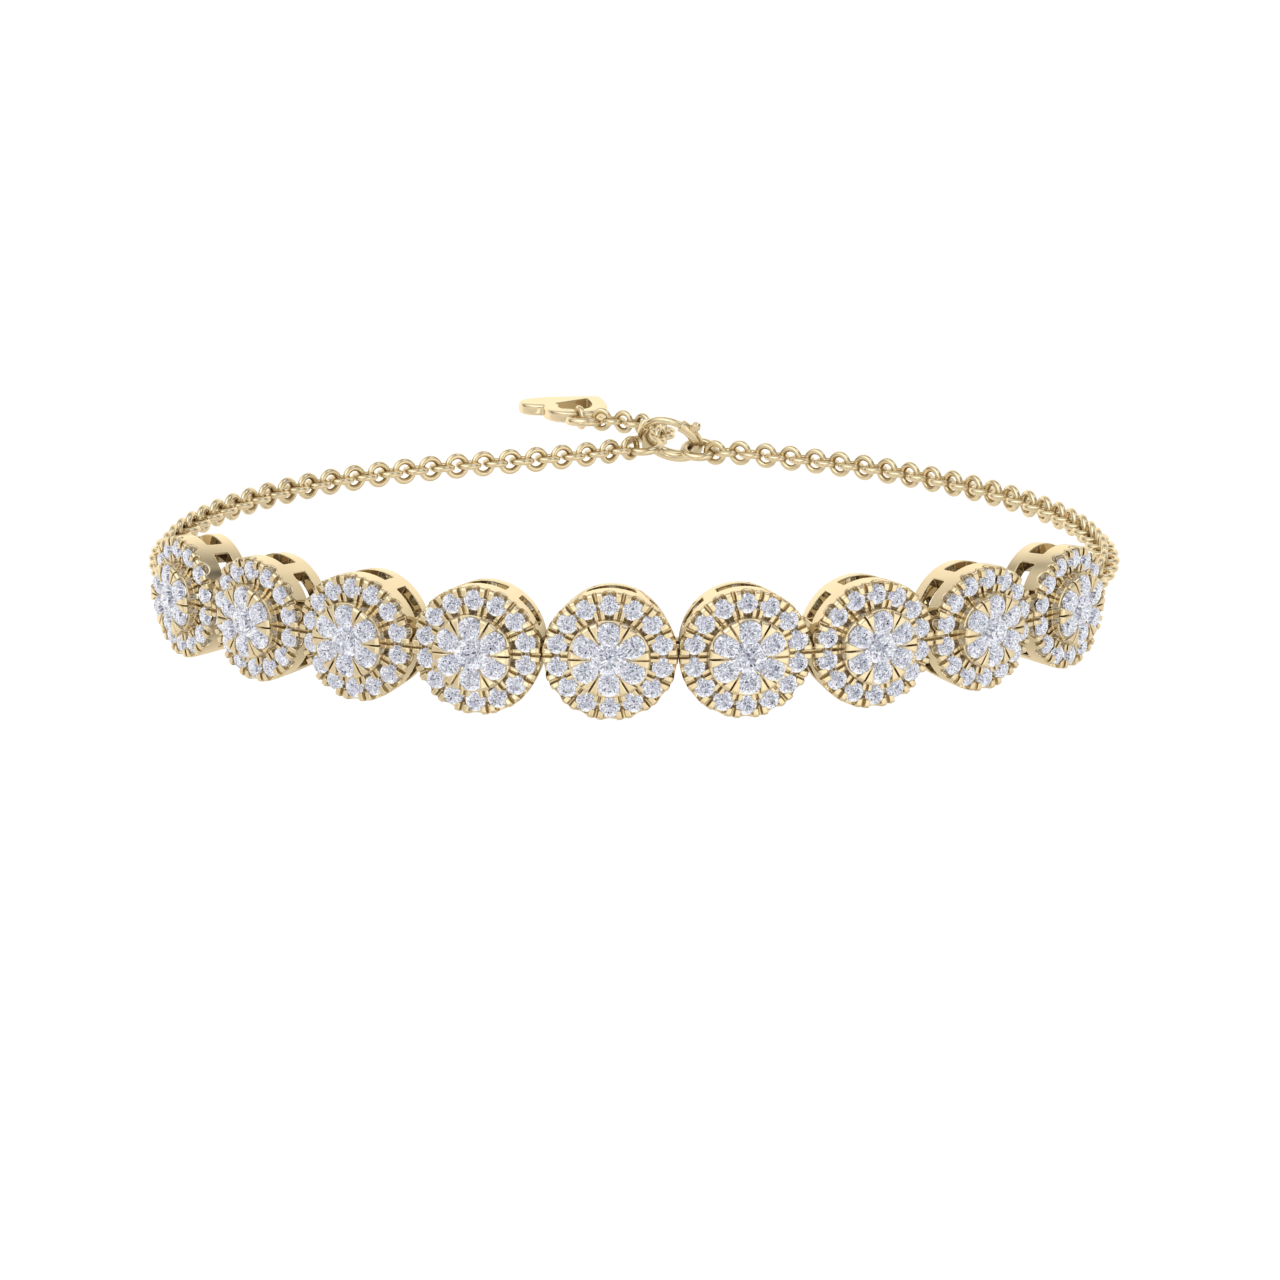 Diamond bracelet in yellow gold with white diamonds of 1.12 ct in weight